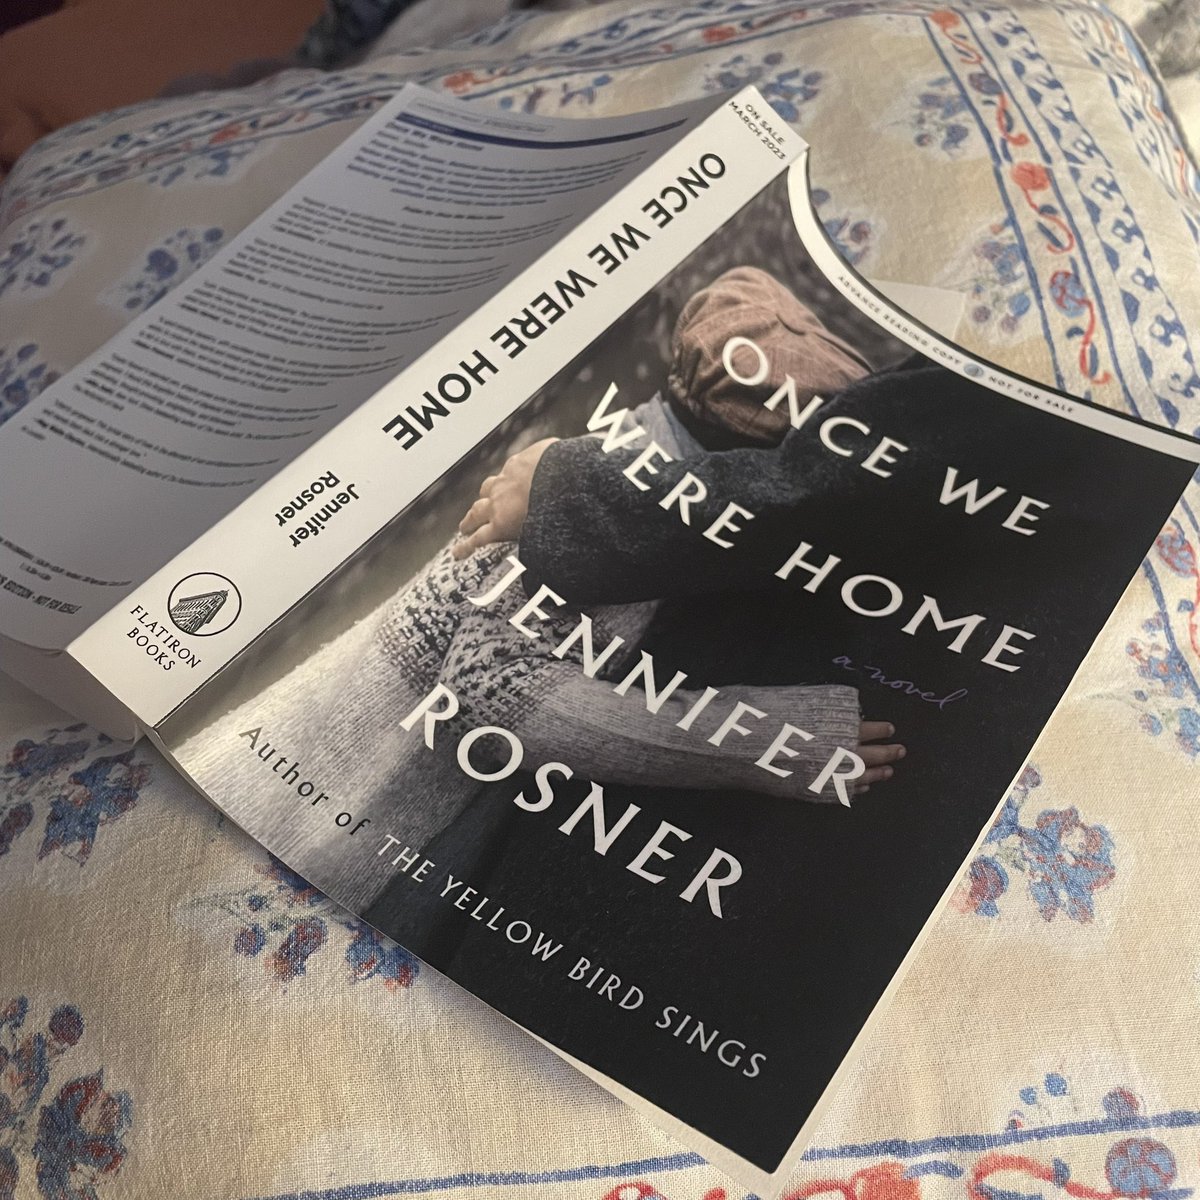 Got a copy of @jen_rosner’s ONCE WE WERE HOME in the mail yesterday and I can’t stop reading it! It’s beautiful and sad and manages to capture the world of children without being too precious. Here it is on Goodreads: goodreads.com/book/show/6078…